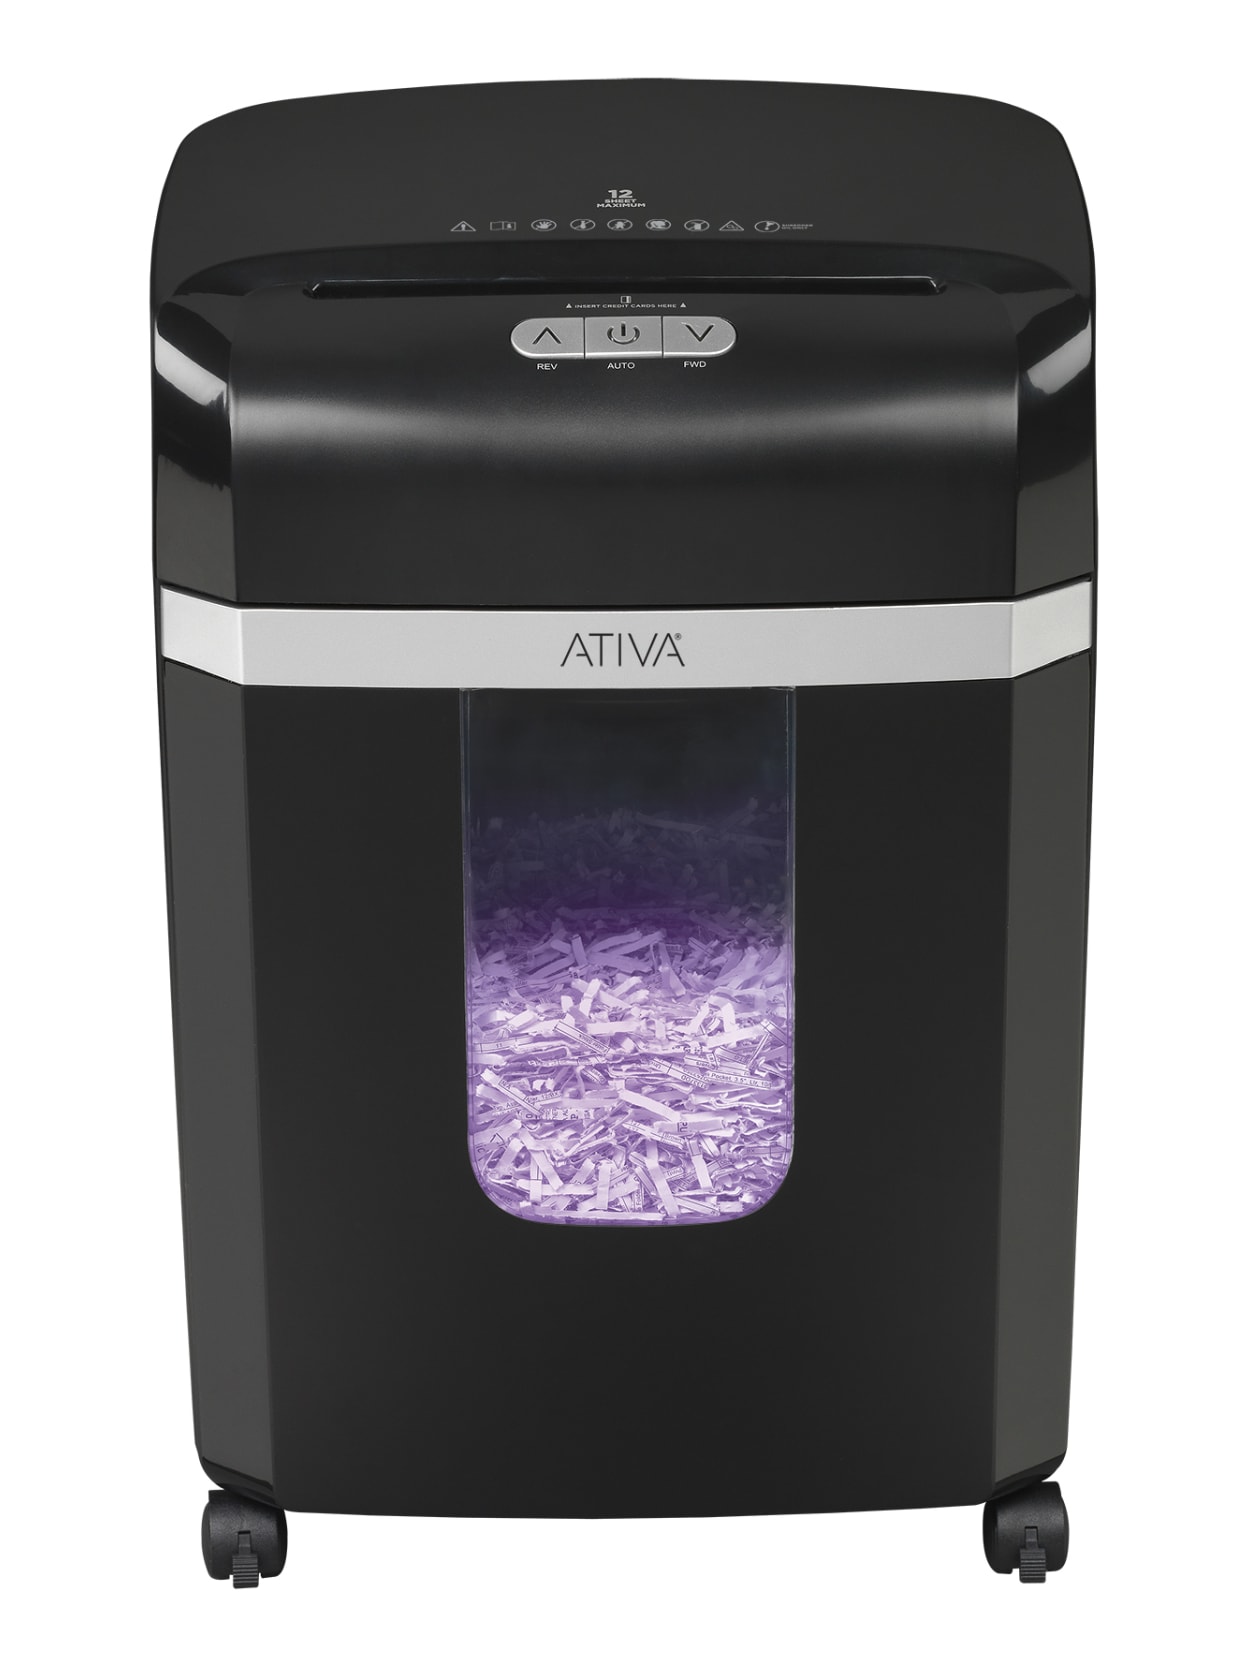 Ativa 12 Sheet Cross Cut Shredder A12cc19 Office Depot,Best Places To Travel In Us In October 2020